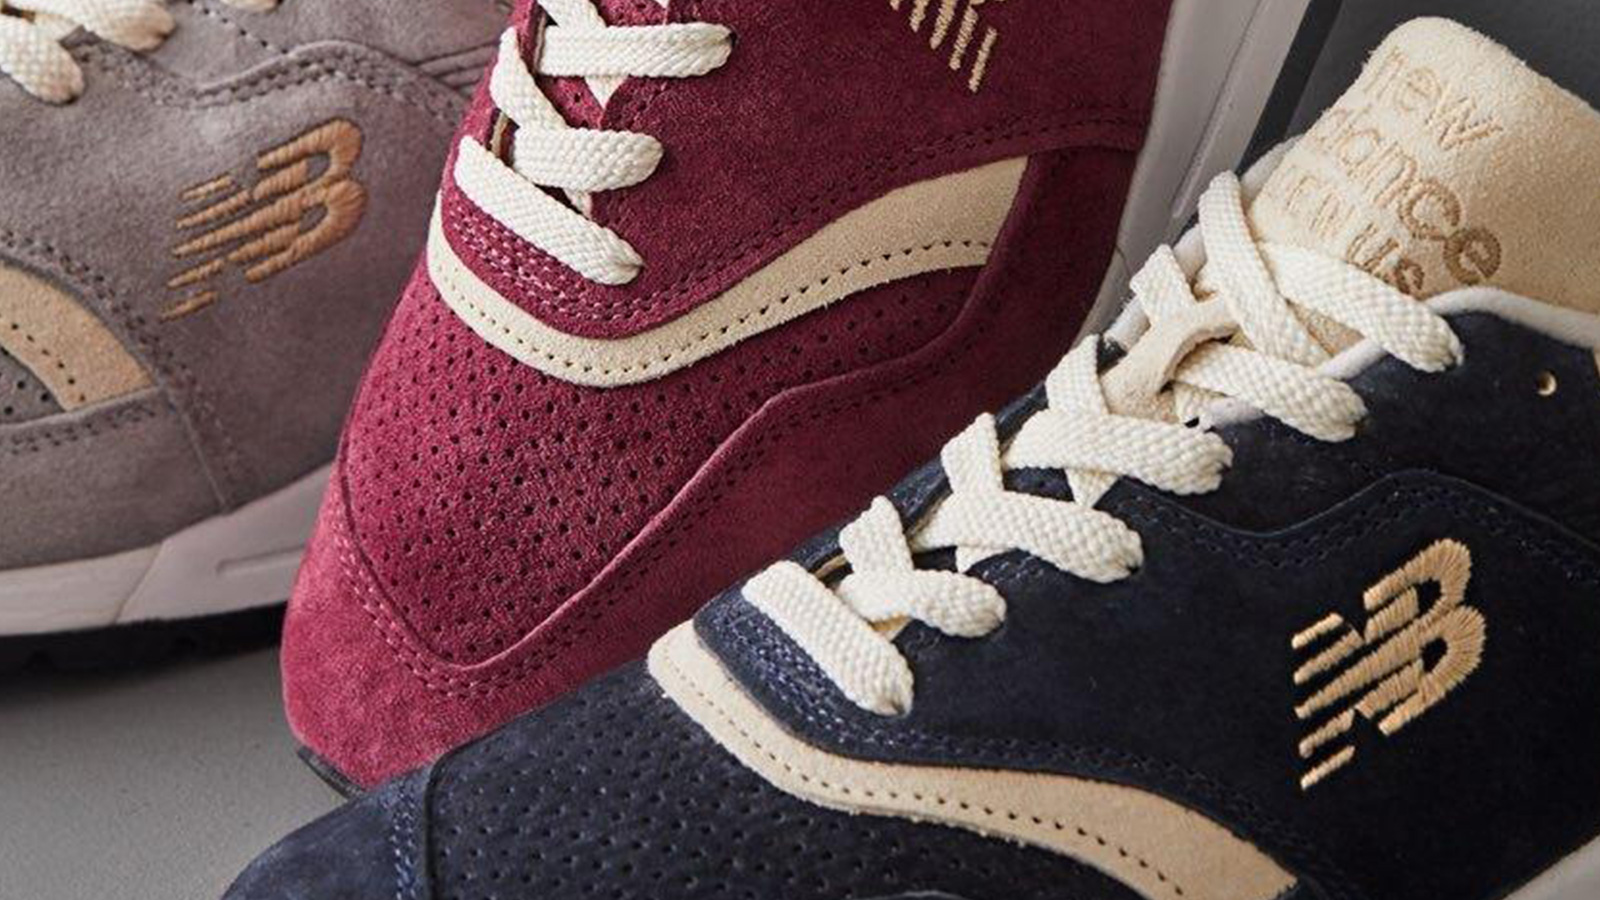 Todd Snyder x New Balance Gets Nostalgic With The Release Of The 